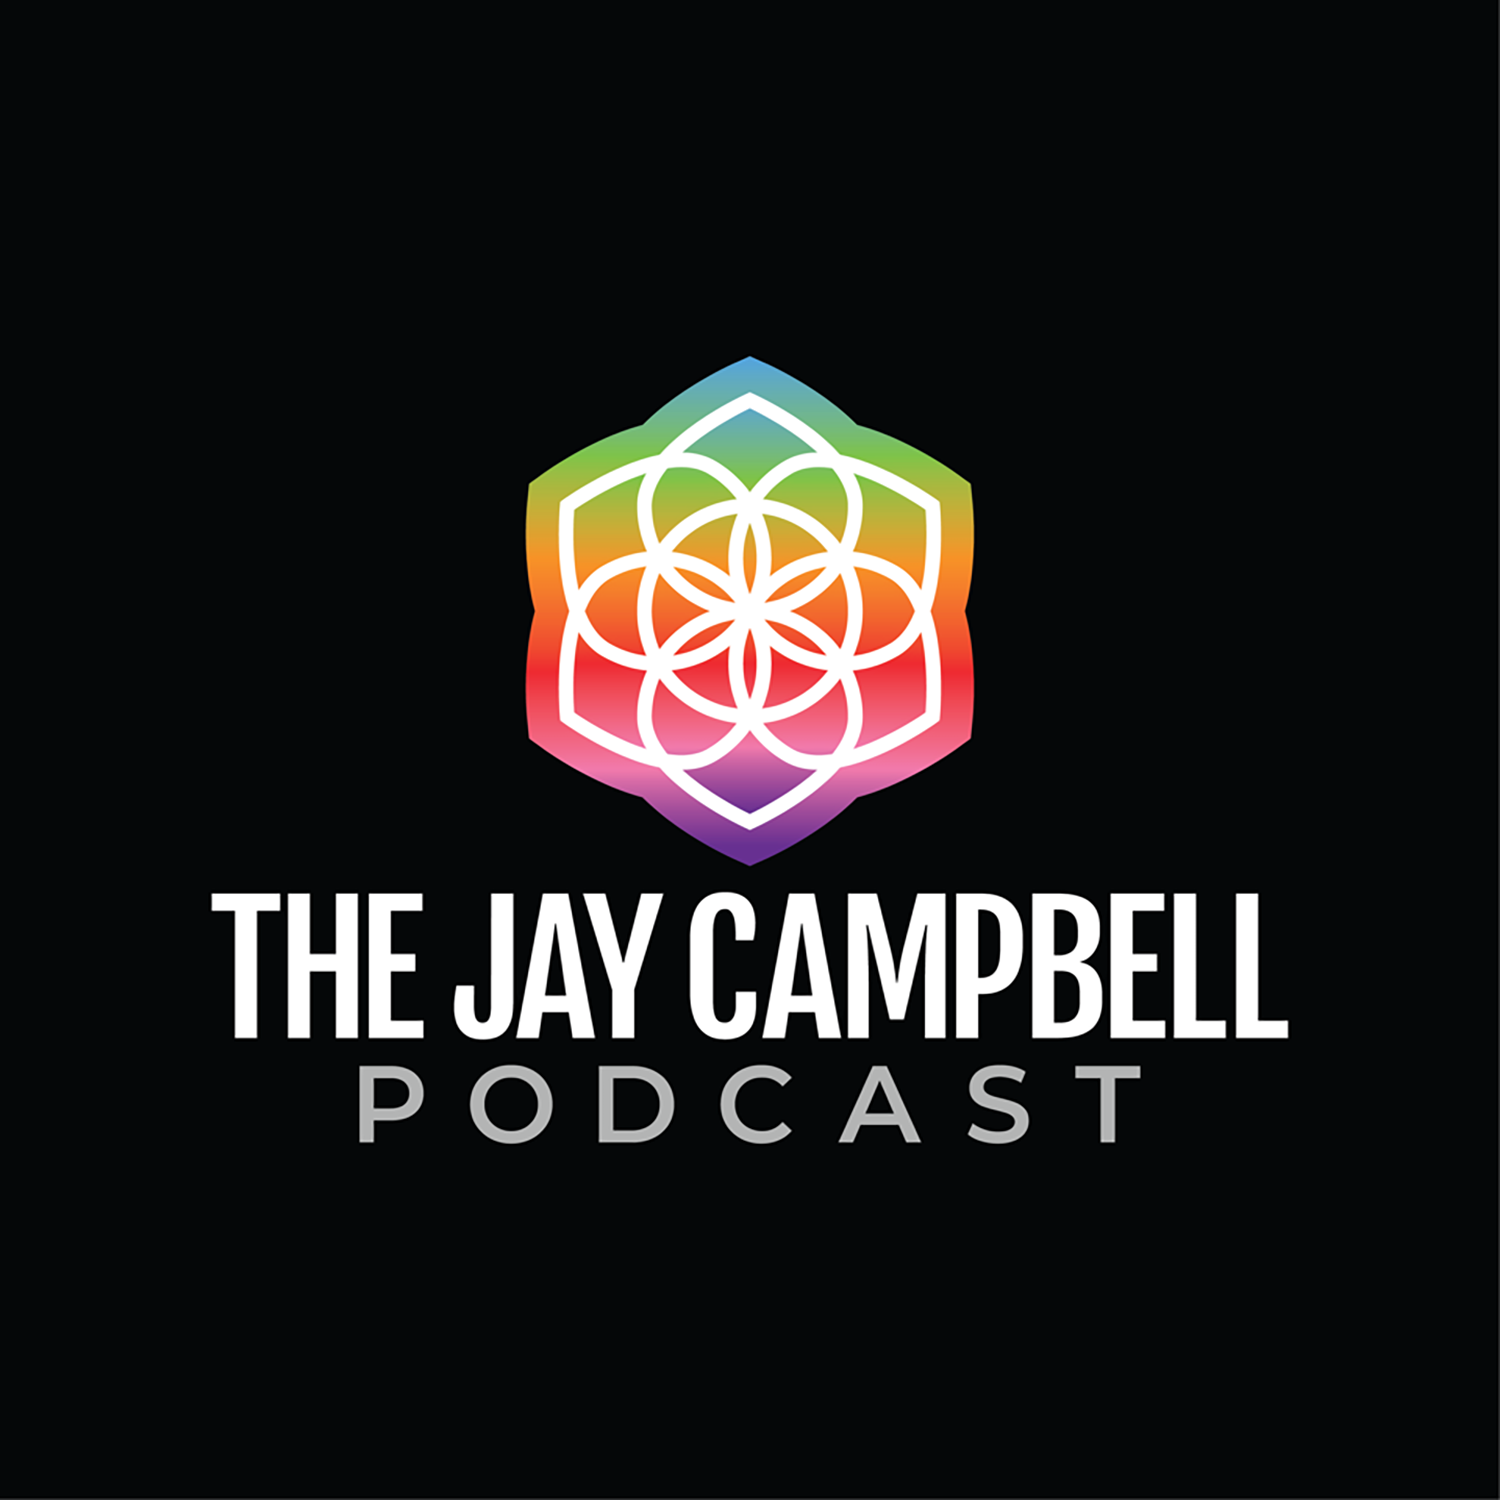 JayCampbellpodcasticon.png (Copy)